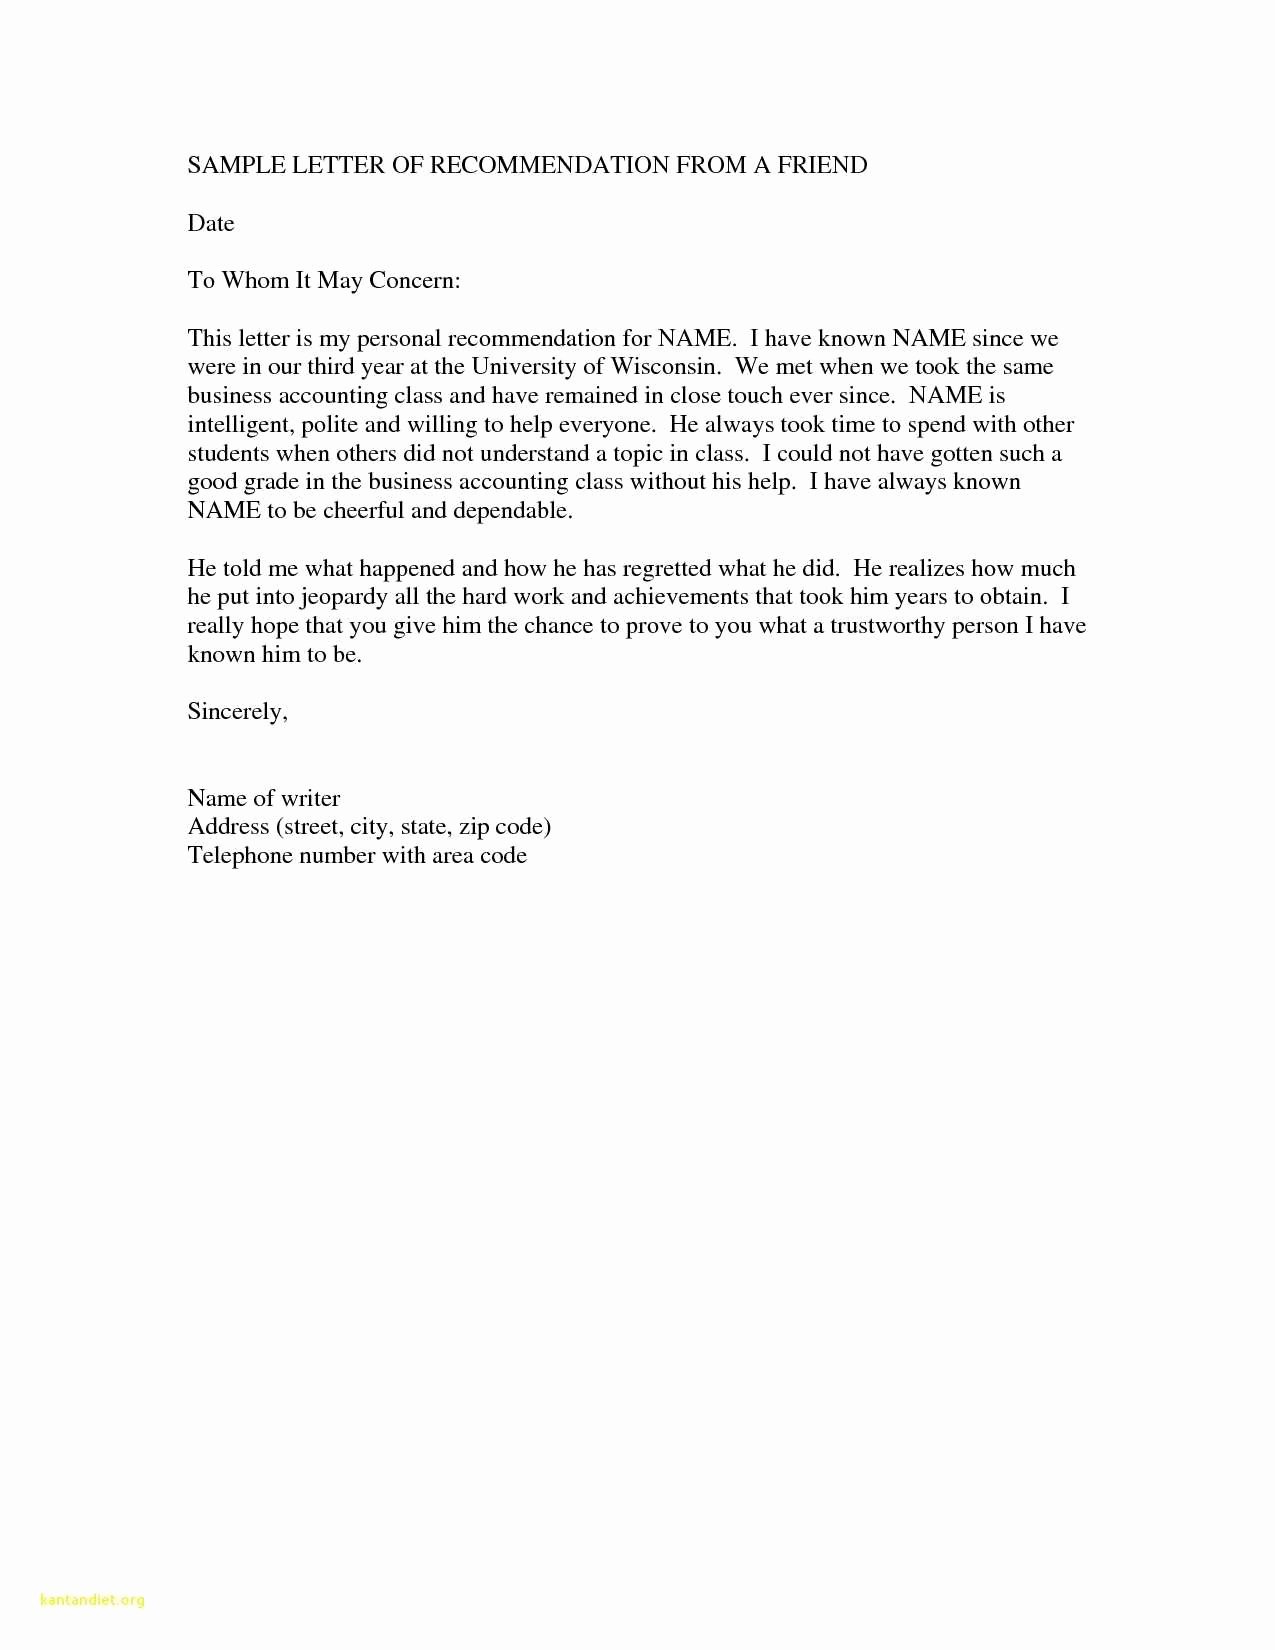 Immigration Reference Letter Template Fresh 2 3 Letter From Friend for Immigration